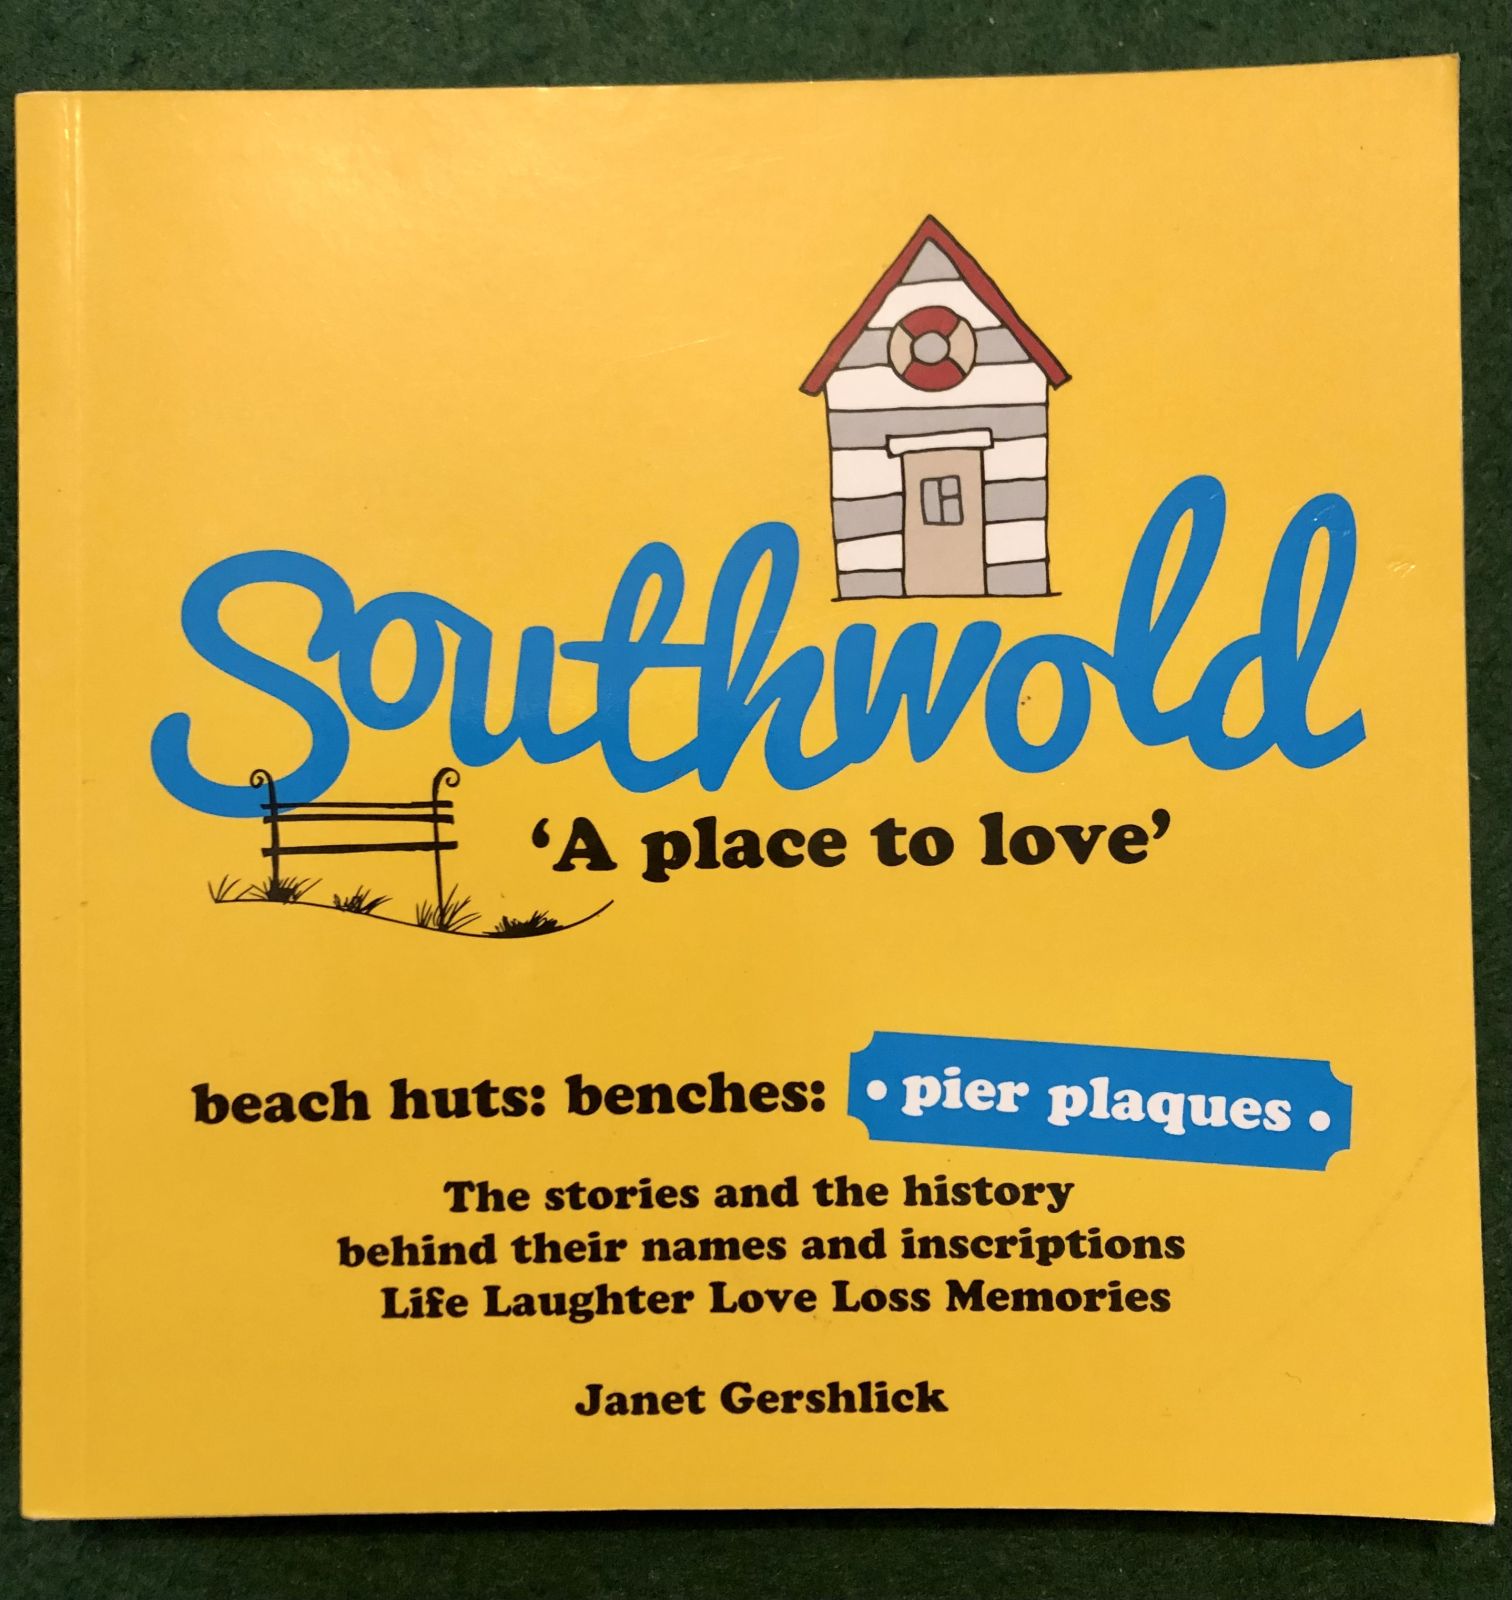 Author Janet Gershlick lives in Southwold and recently wrote this book of stories behind beach hut names, benches and pier plaques. www.janettalks.com